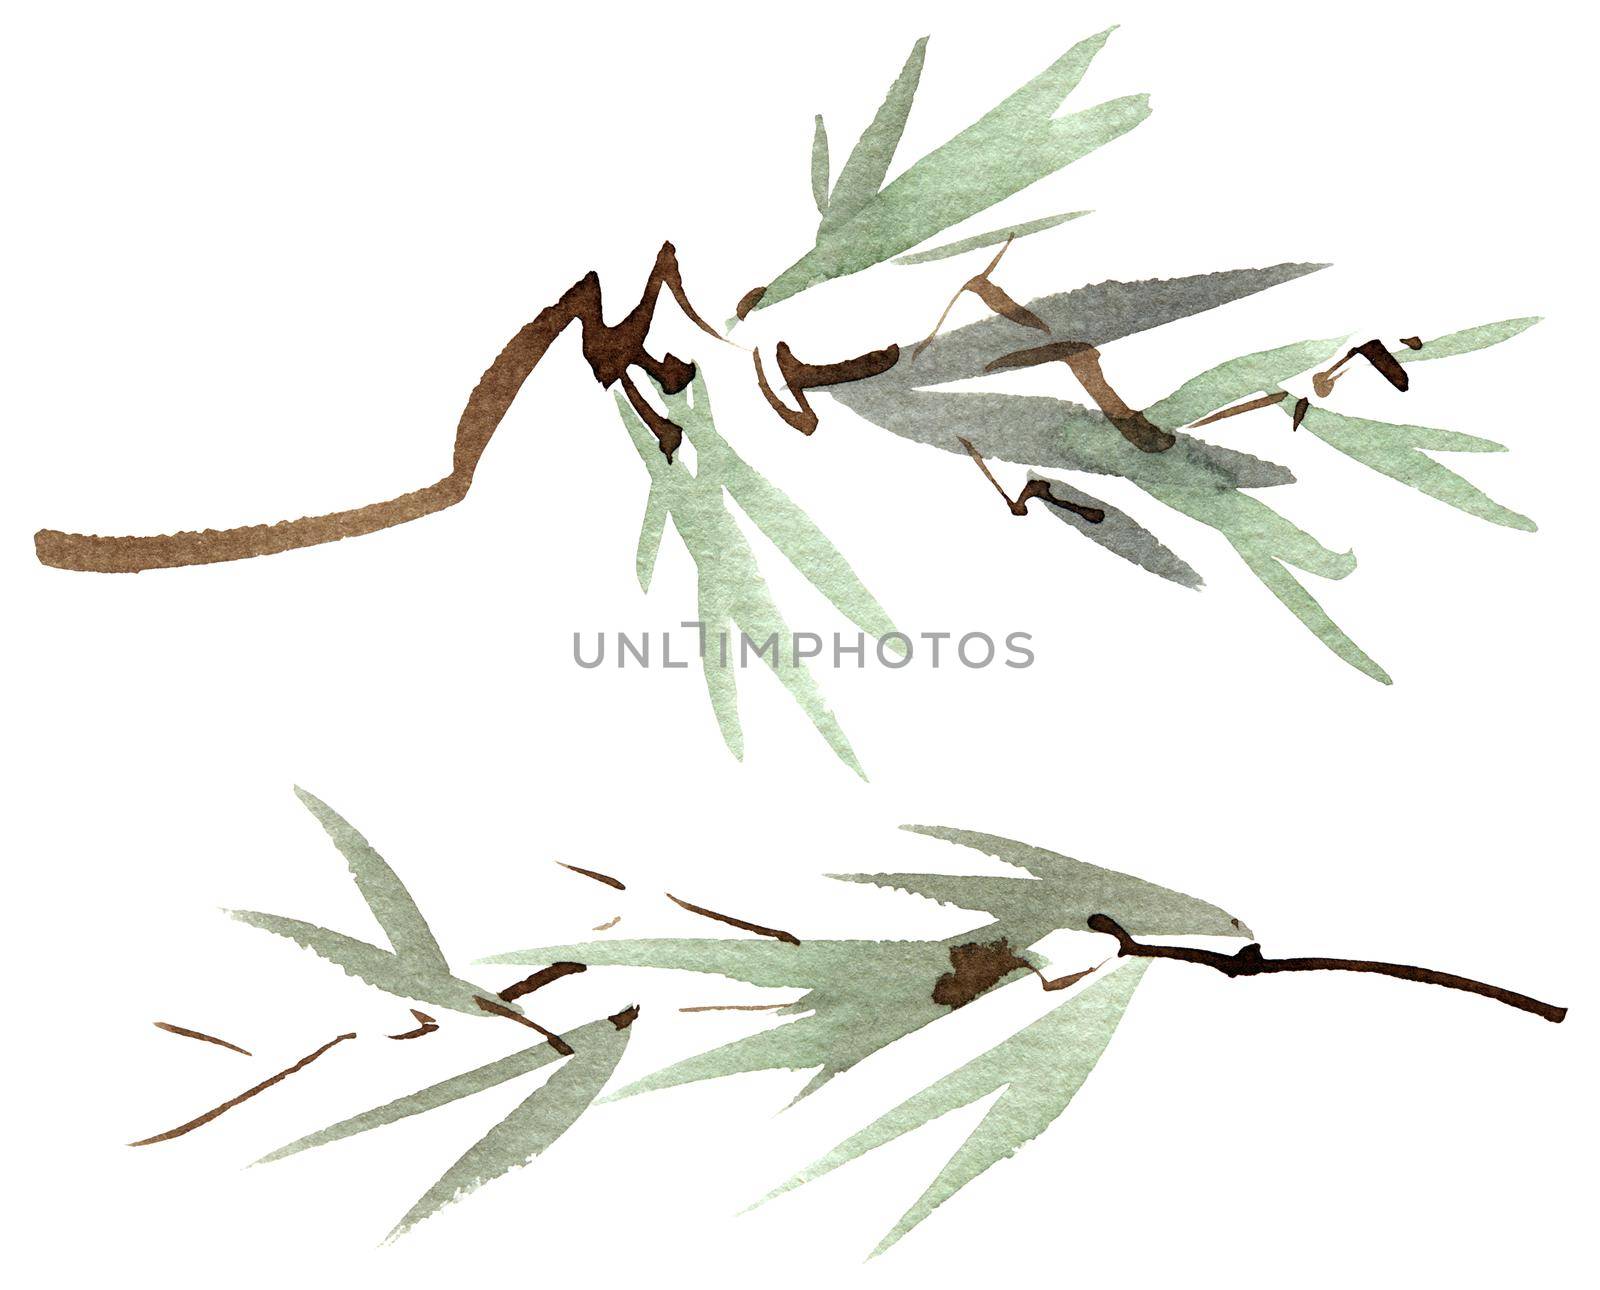 Watercolor and ink illustration of tree leaves - set of branches on white background. Oriental traditional painting in style sumi-e or gohua.